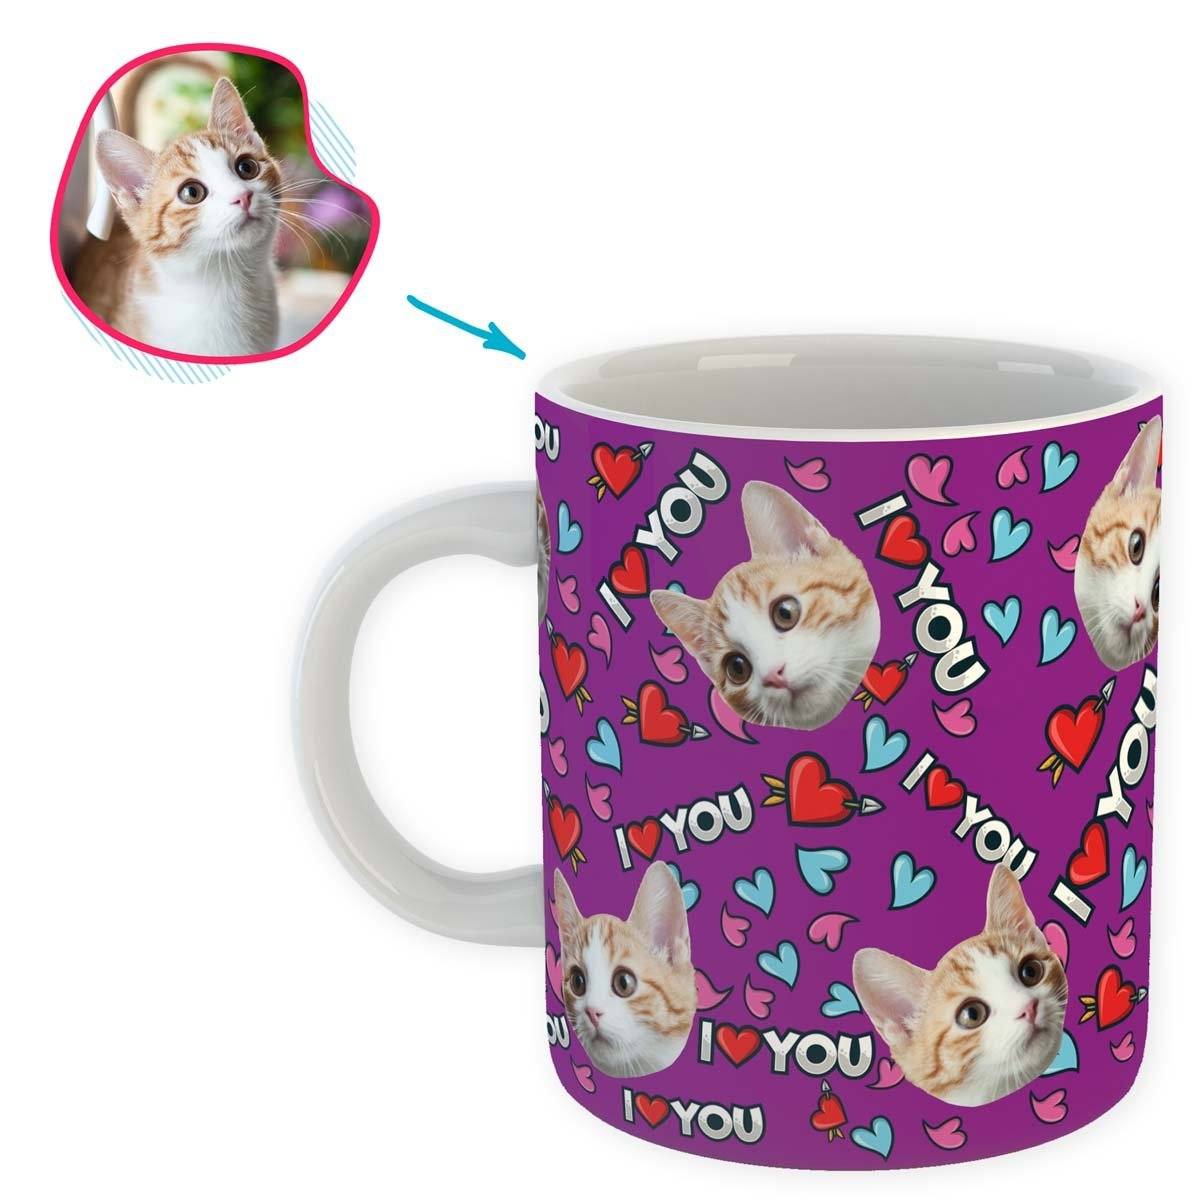 purple Love You mug personalized with photo of face printed on it